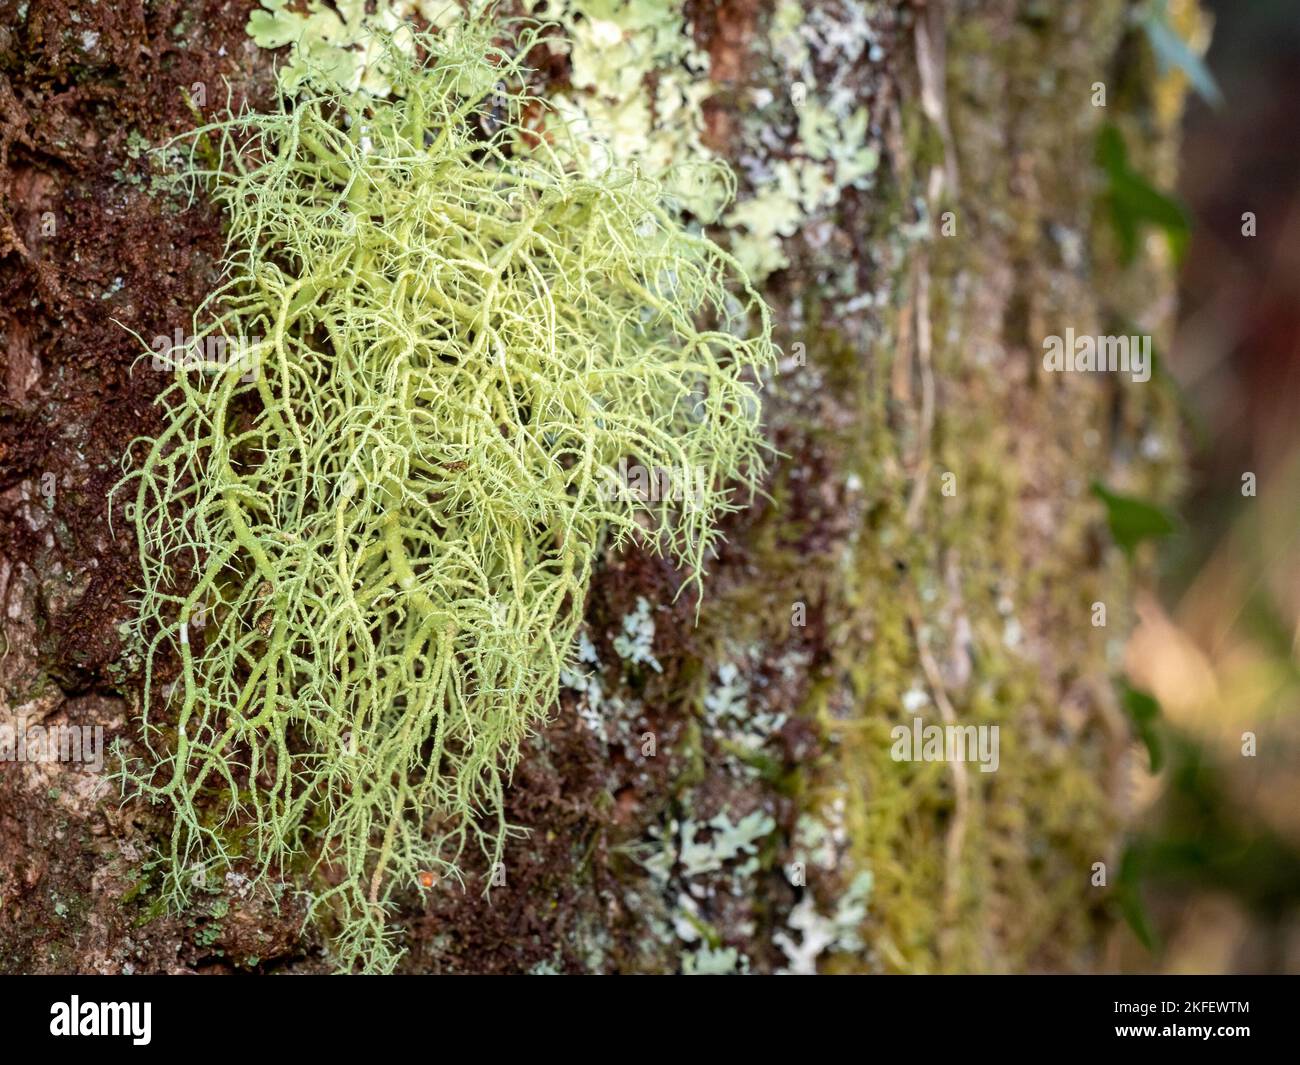 usnea barbata lichen on a trunk in the woods with blurred background Stock Photo